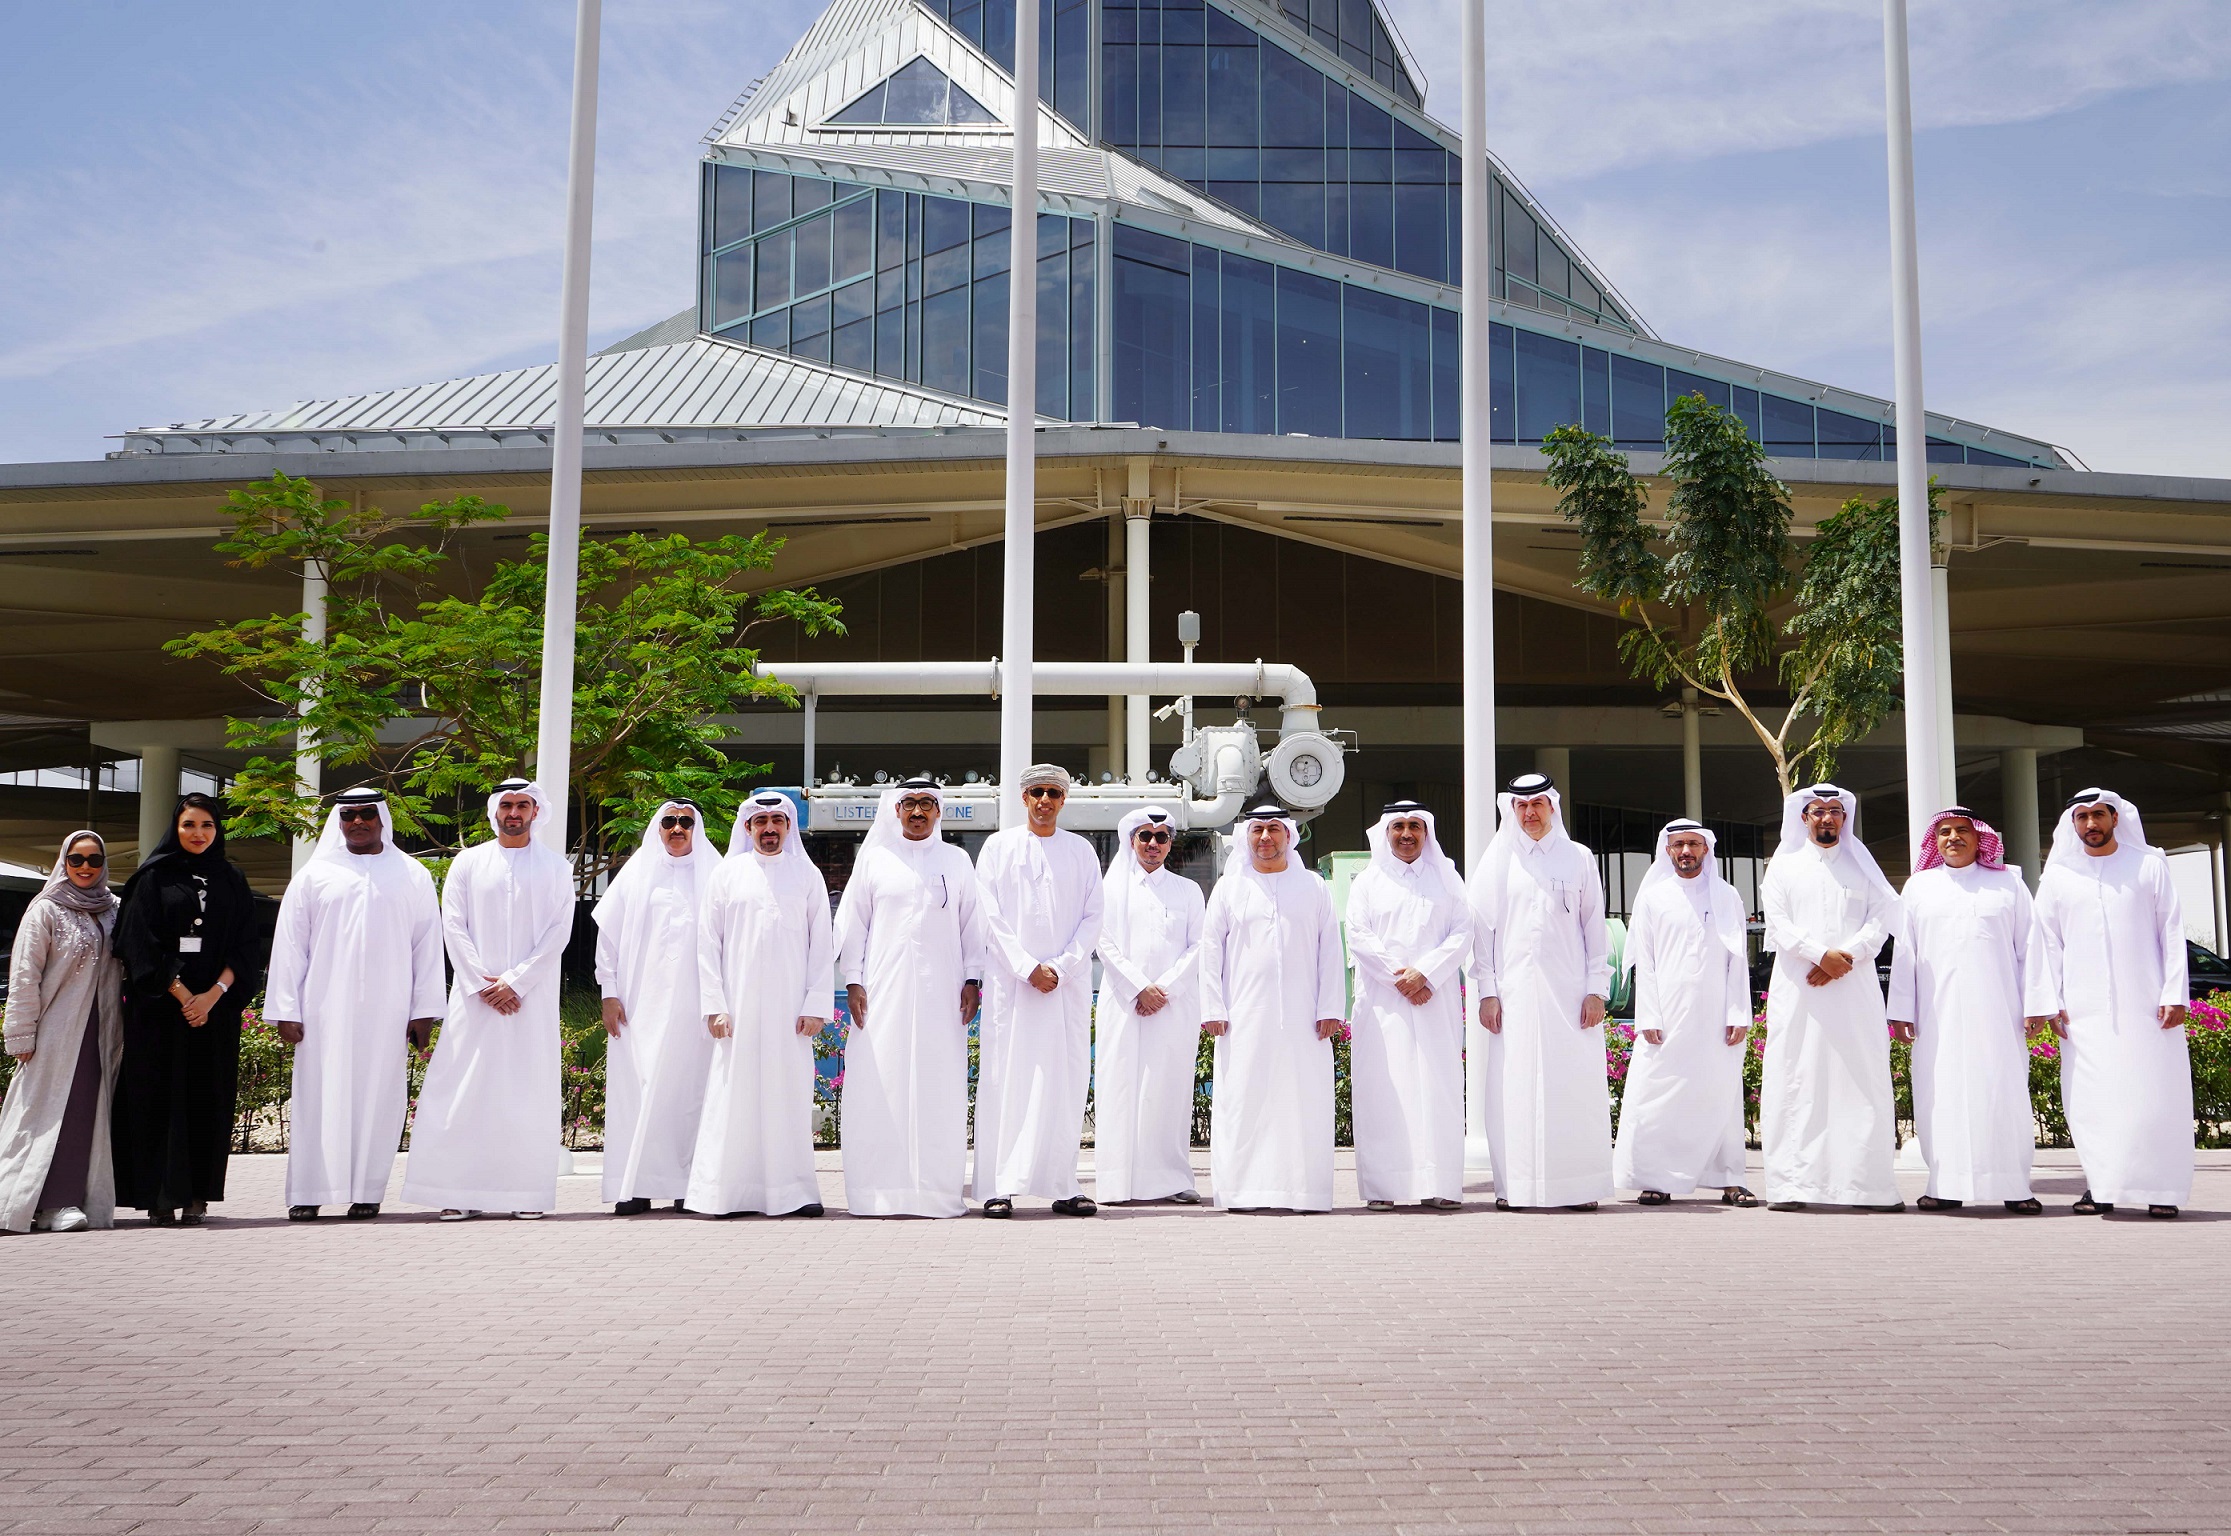 High-level delegation from GCCIA learns about DEWA’s efforts in renewable energy during a visit to the Mohammed bin Rashid Al Maktoum Solar Park – EQ Mag